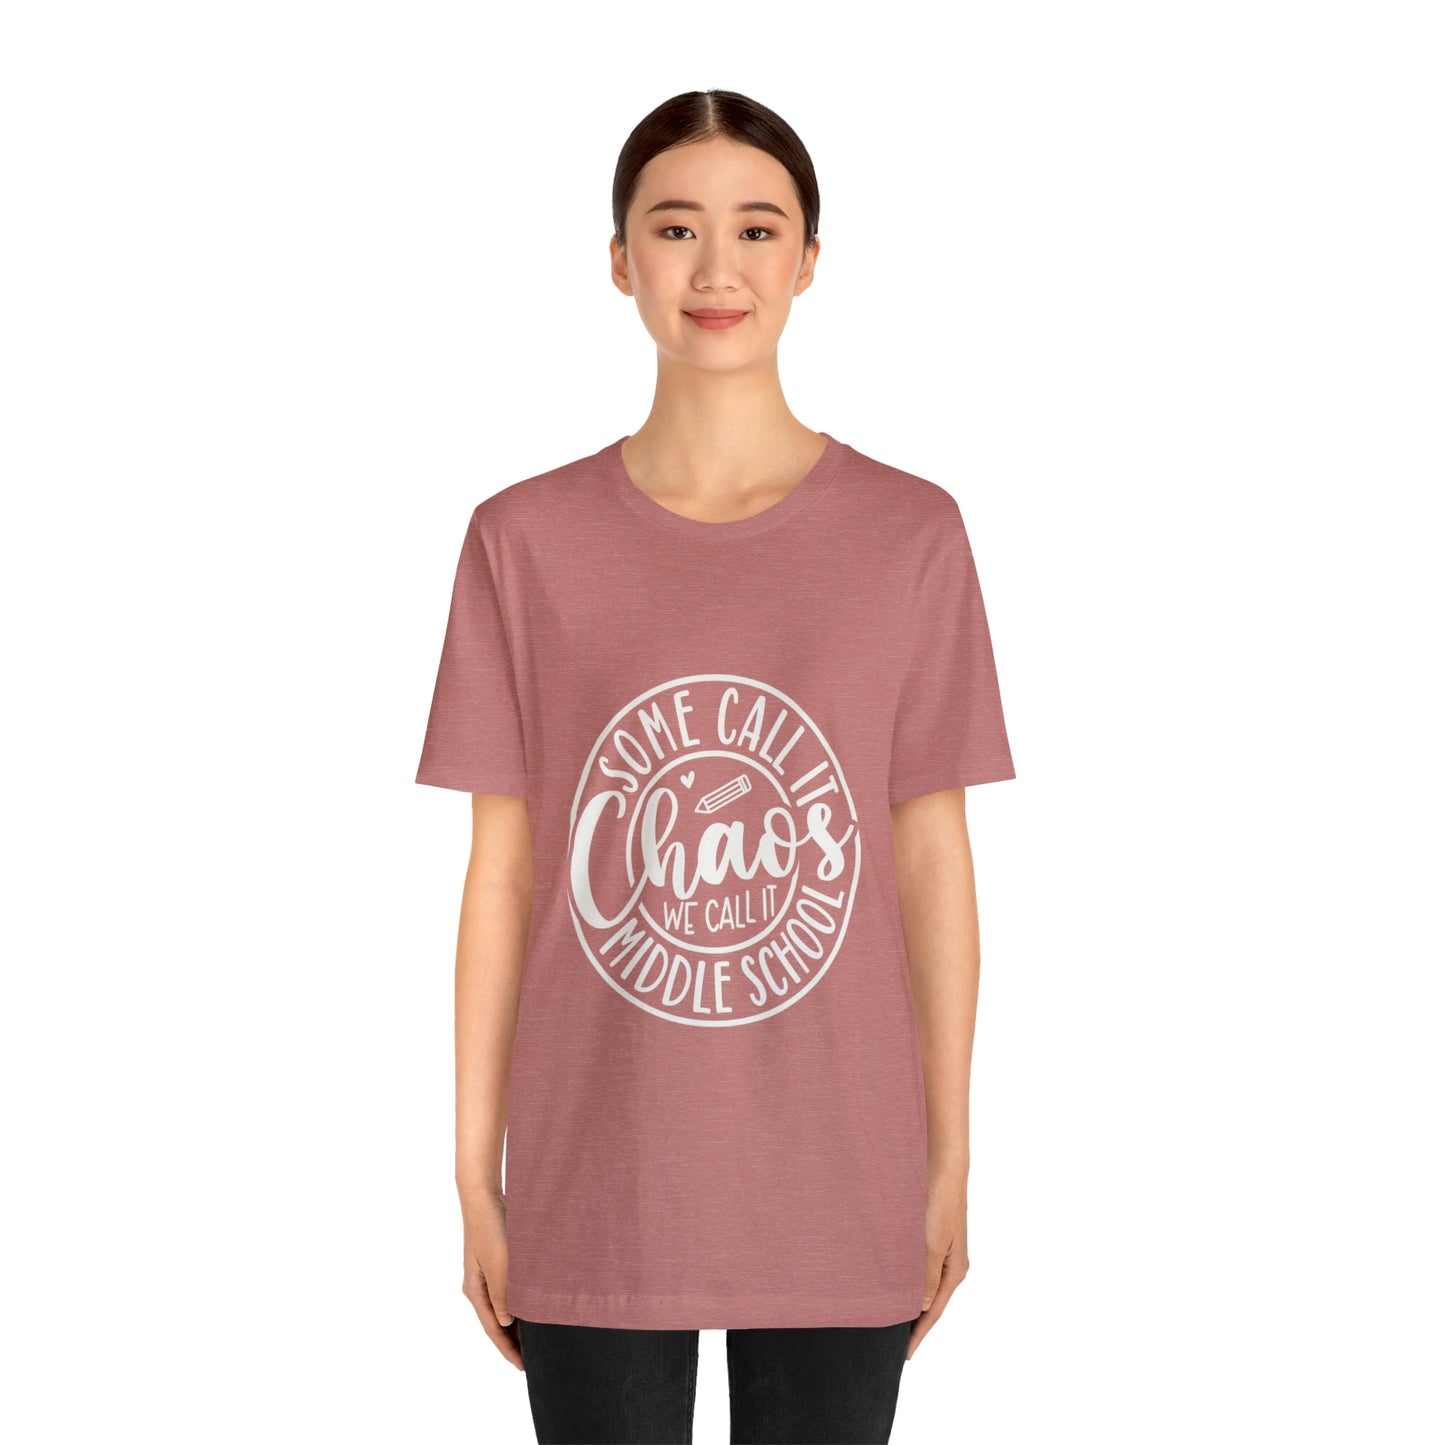 "Some call it Chaos, We call it middle school."- white lettering- Unisex Jersey Short Sleeve Tee